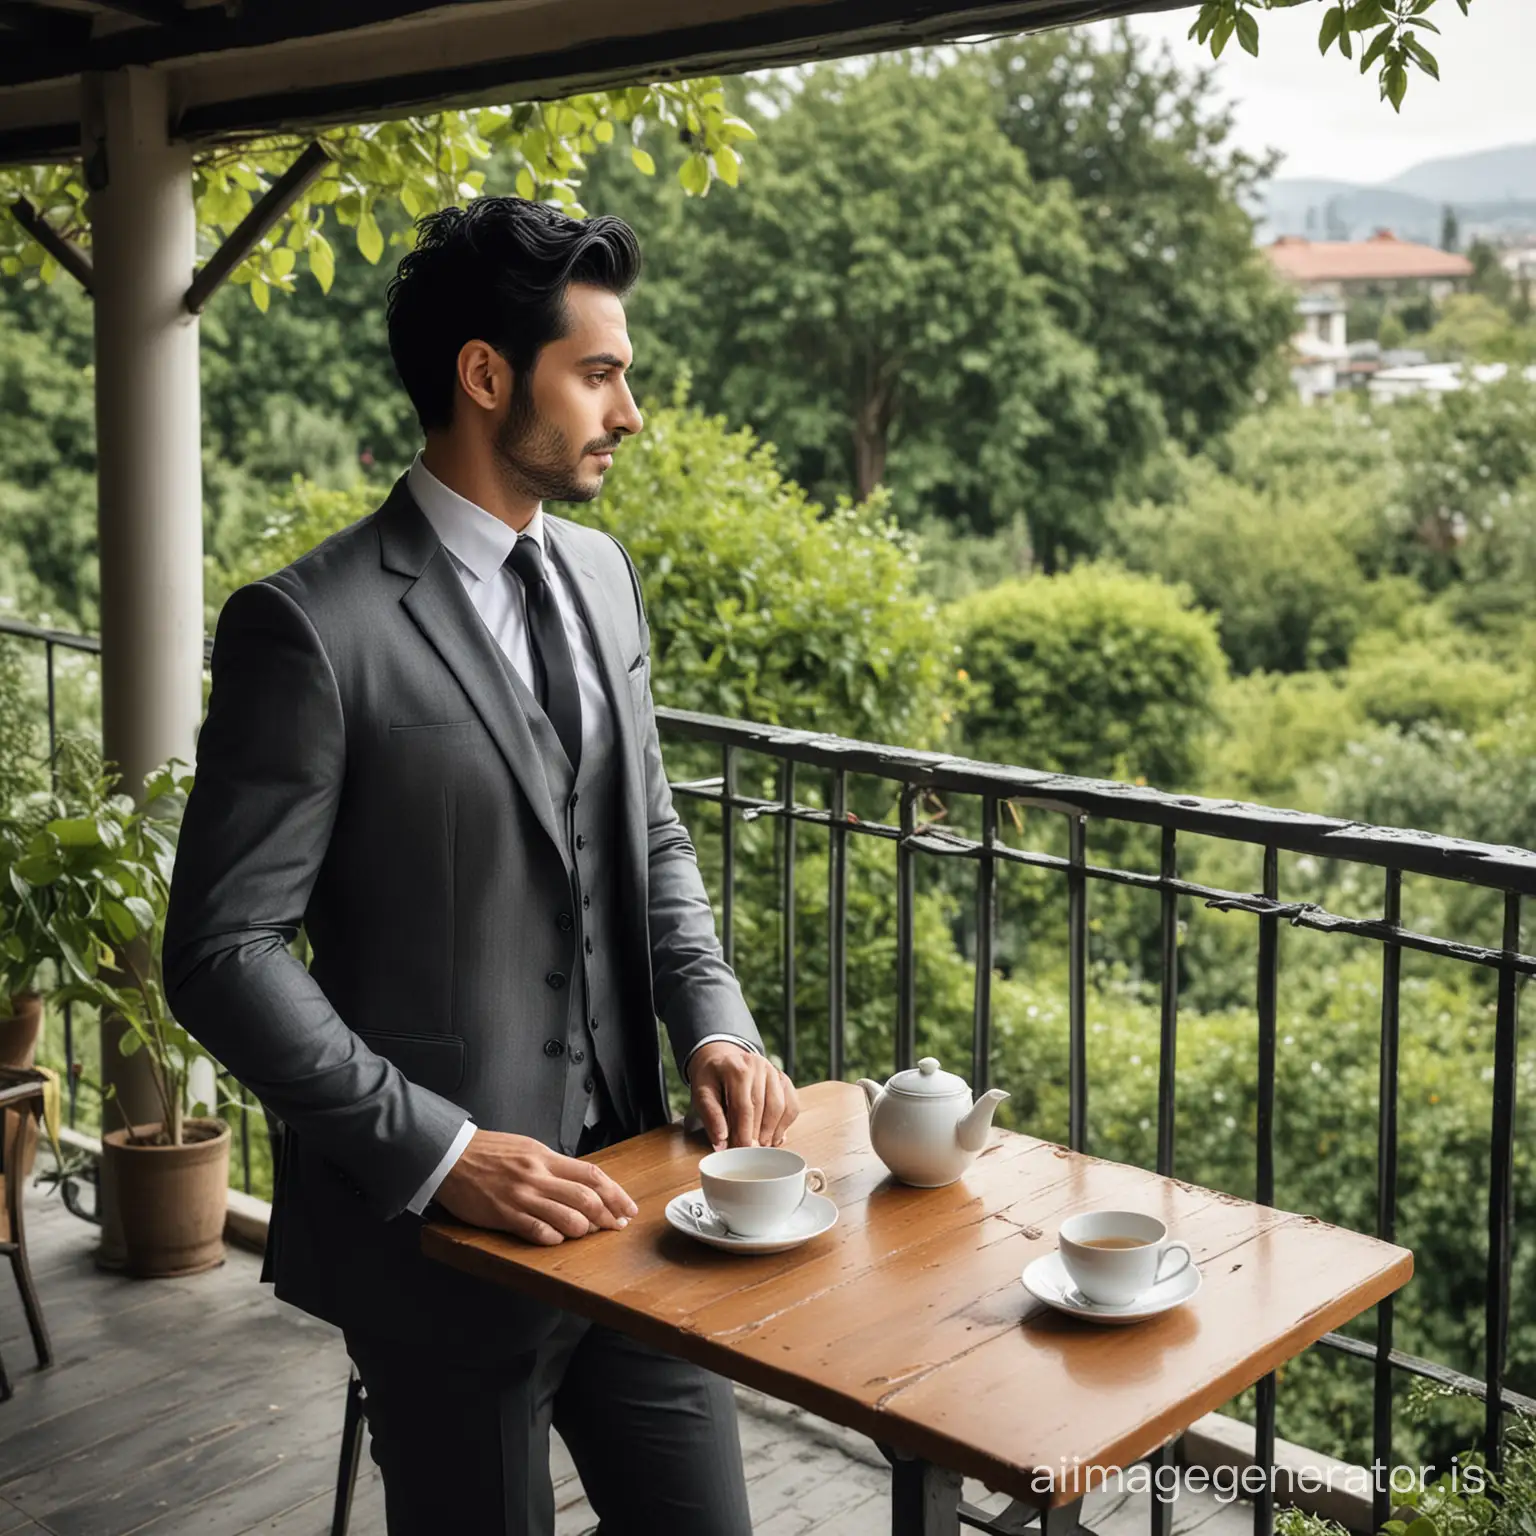 A suit man with black hairs in balcony with garden view with tea on table